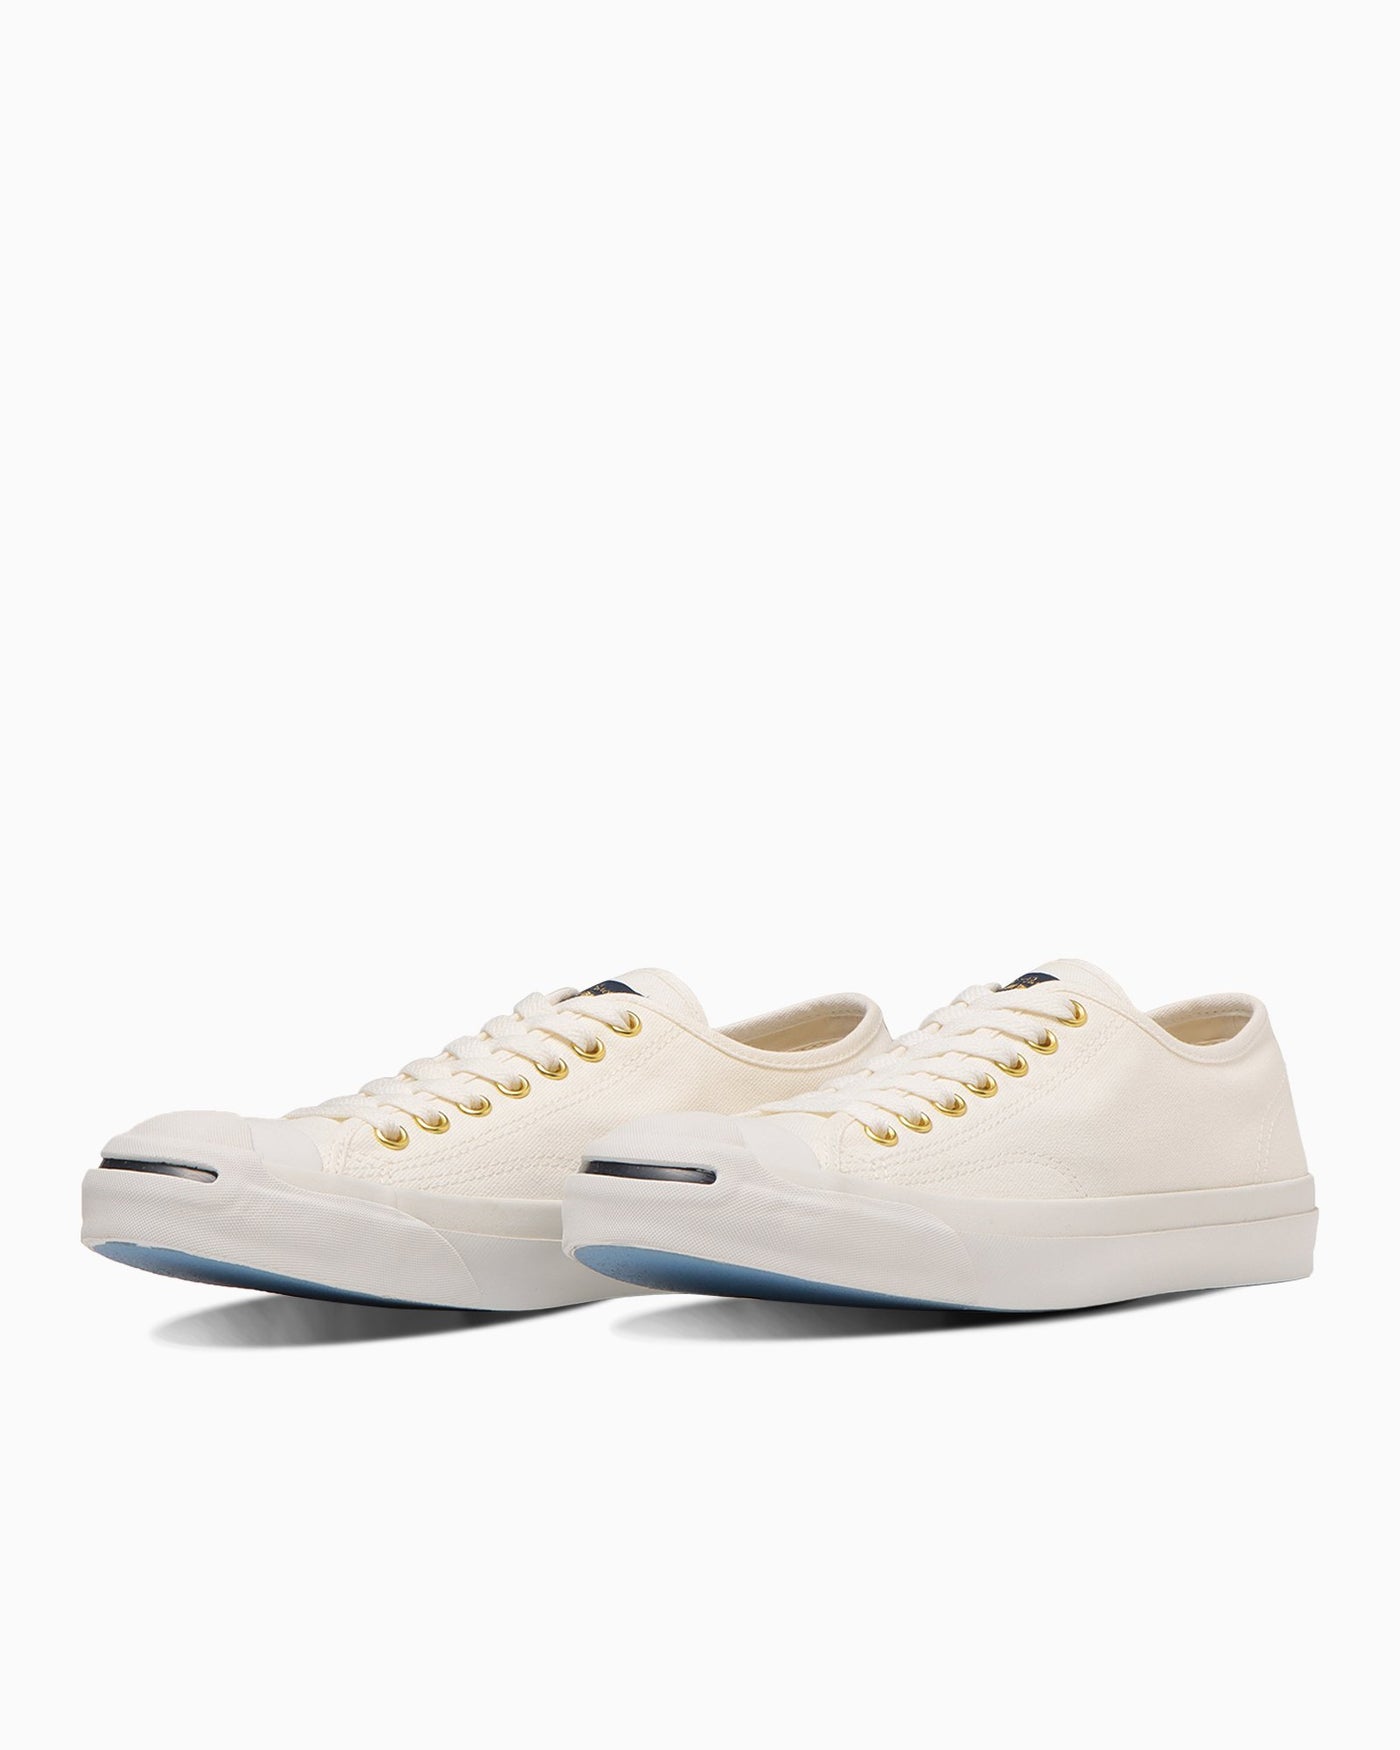 JACK PURCELL RT RH